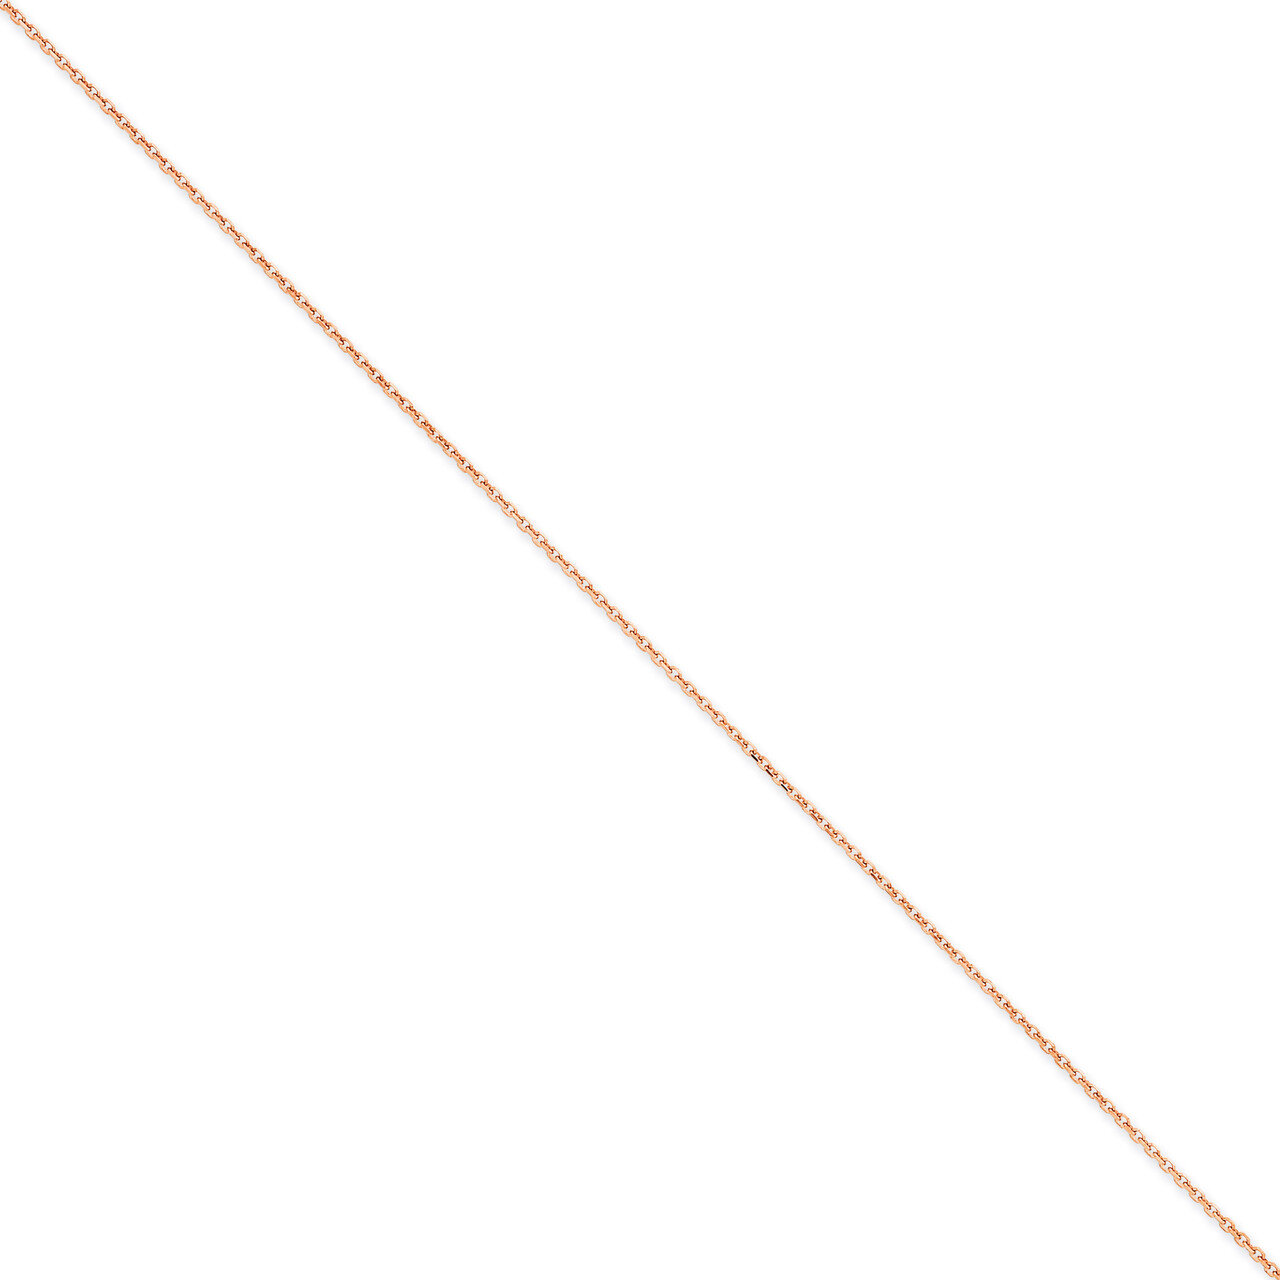 1.4mm Diamond-cut Cable Chain 20 Inch 14k Rose Gold RSC21-20